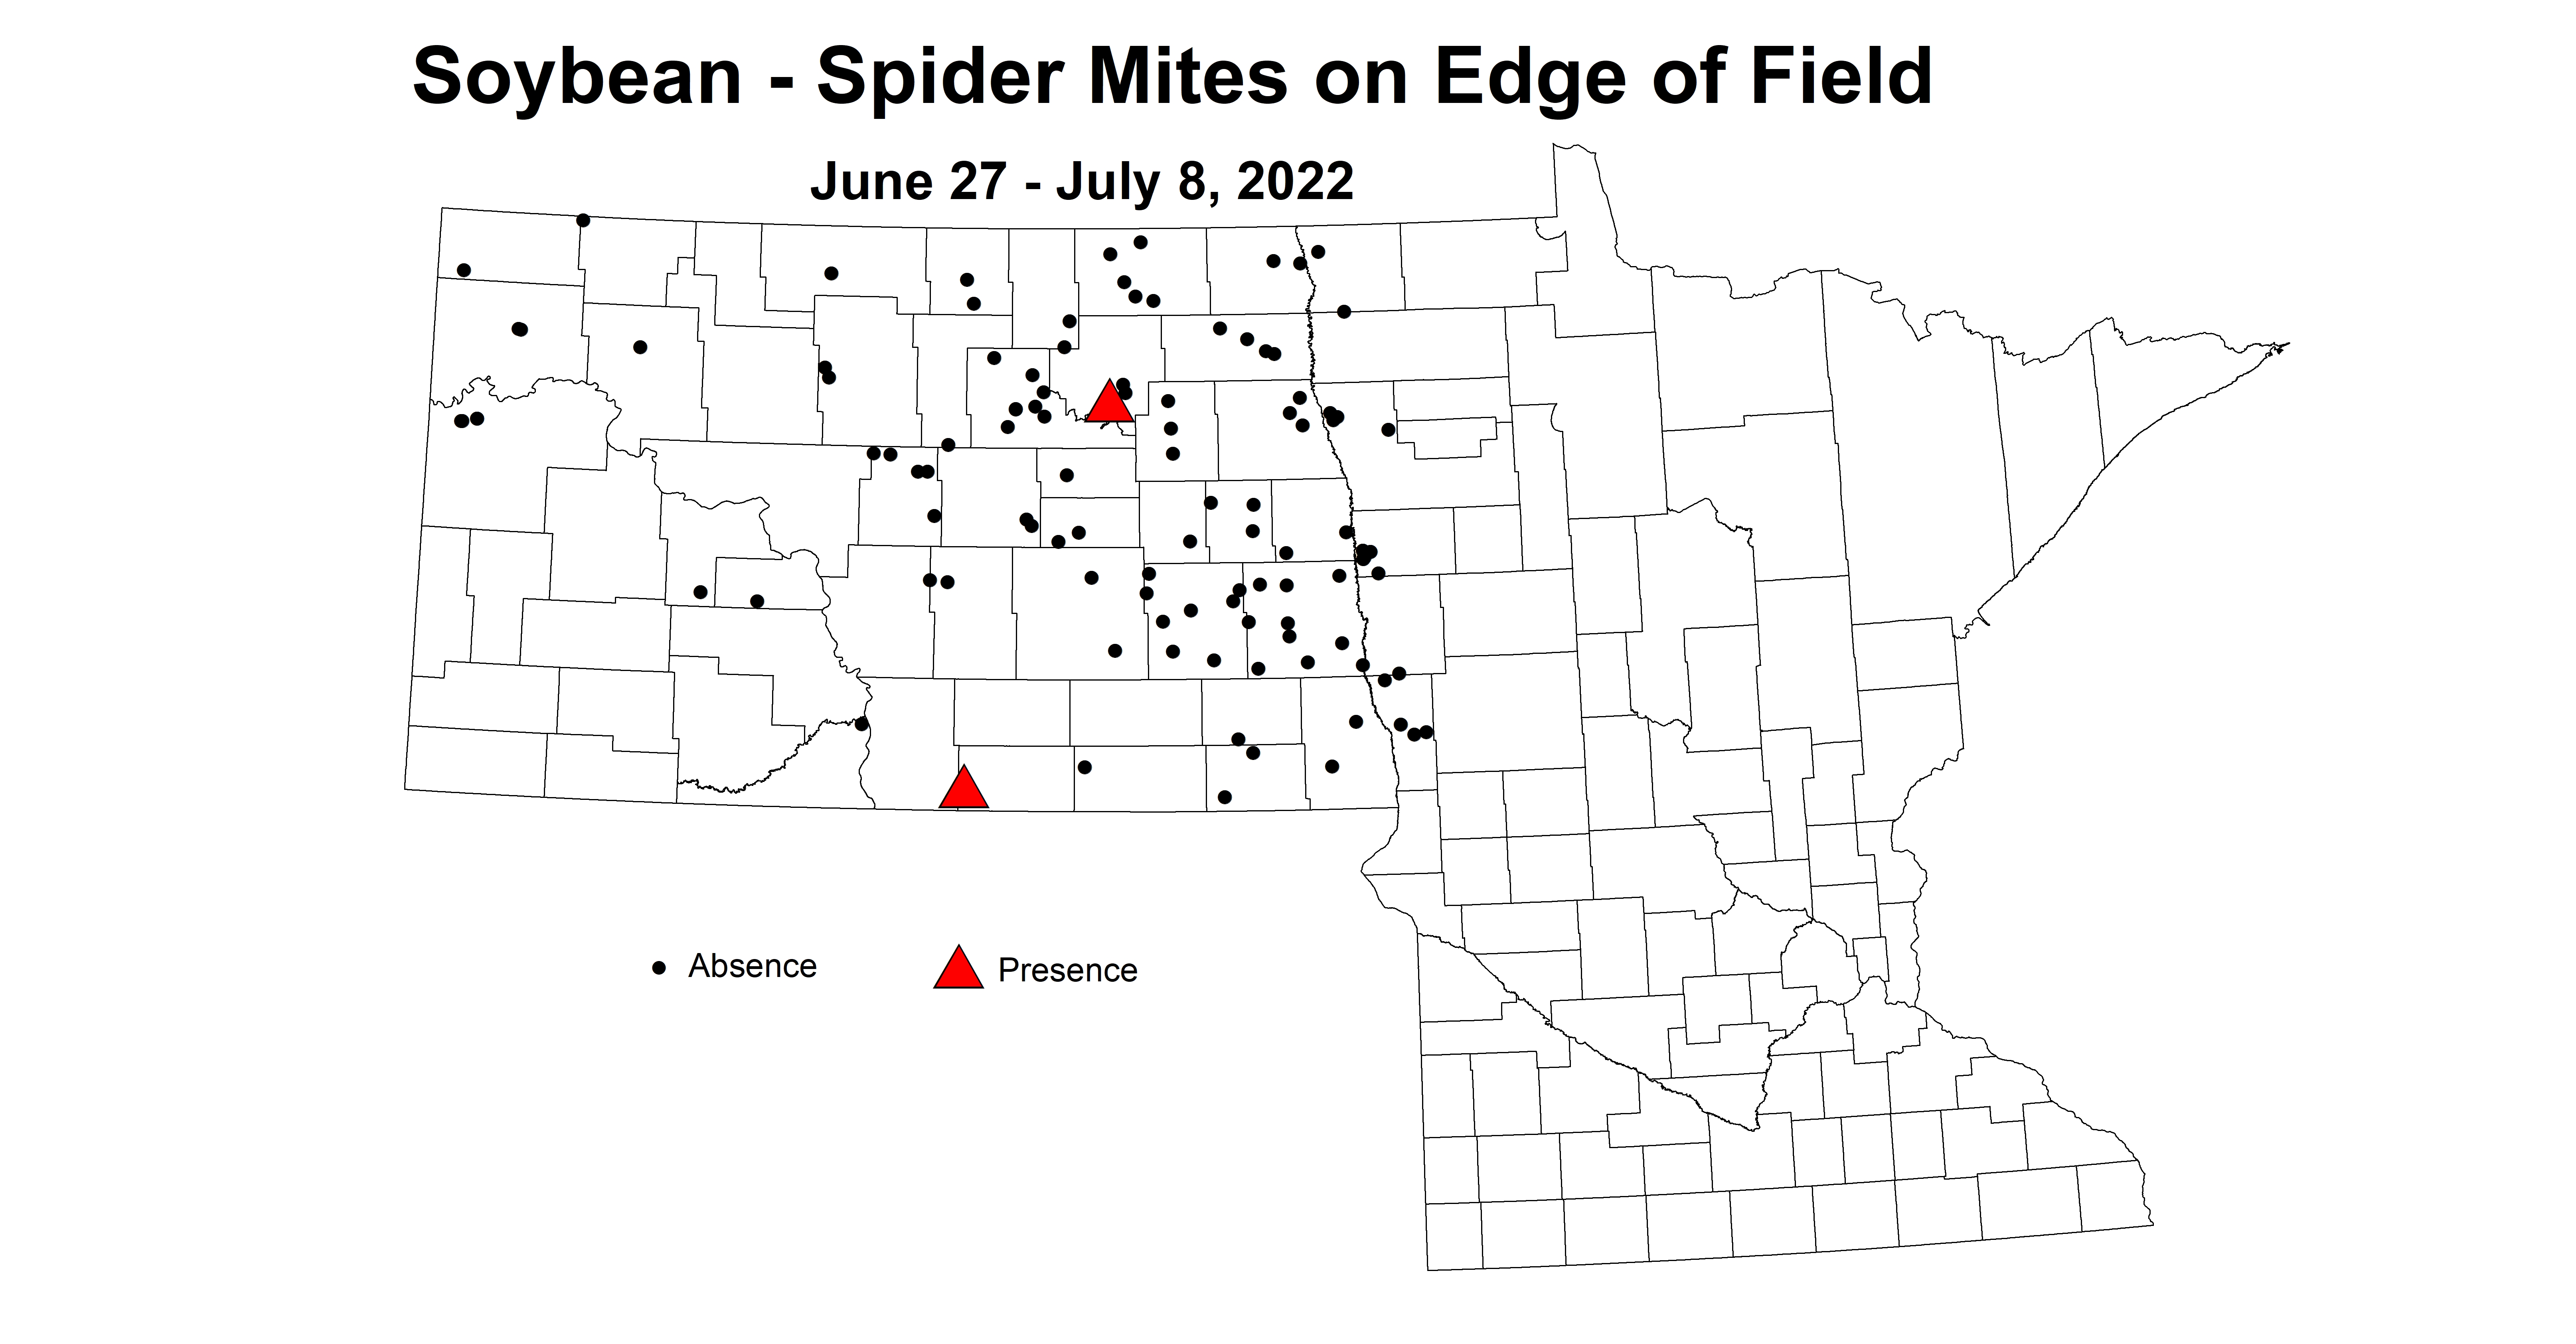 ND IPM map of soybean spyder mites on edge of field June 27 - July 8 2022